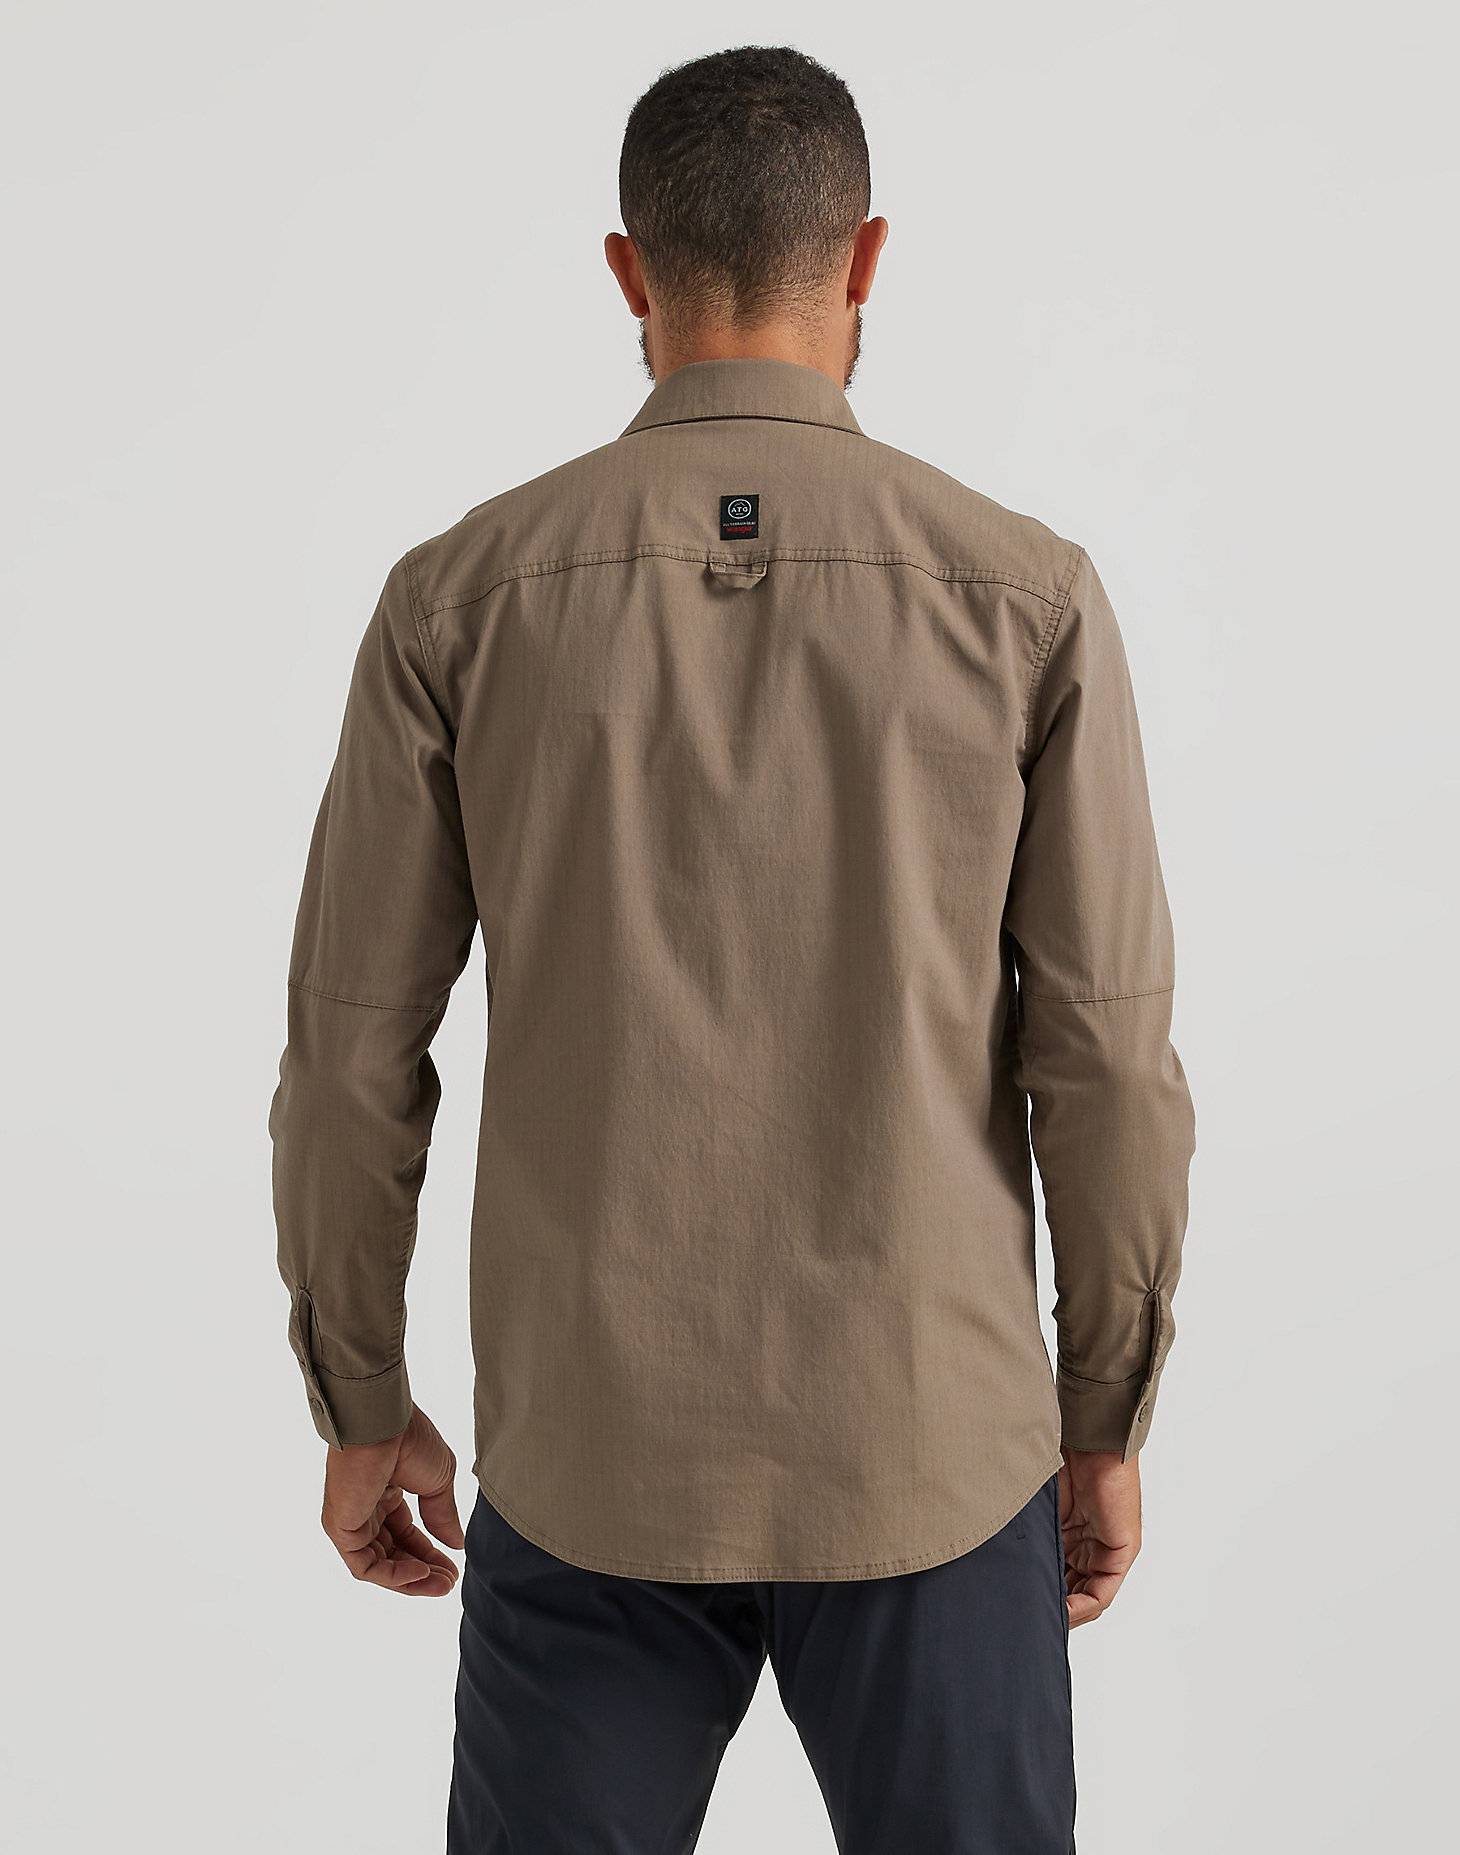 Long Sleeve Rugged Utility Shirt in Bungee Cord alternative view 1